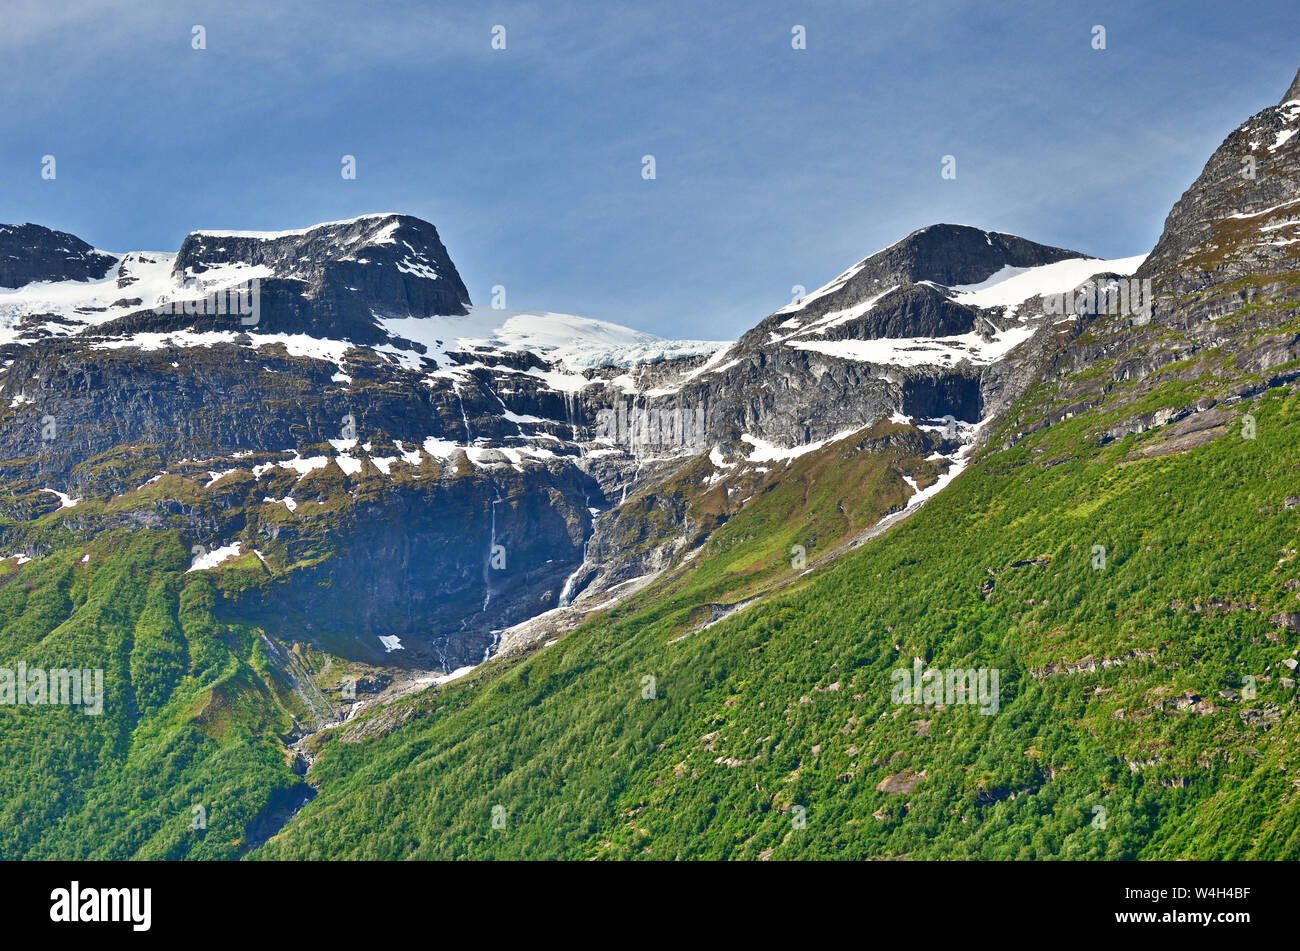 Snow-capped Mountains in Norway. Stock Photo